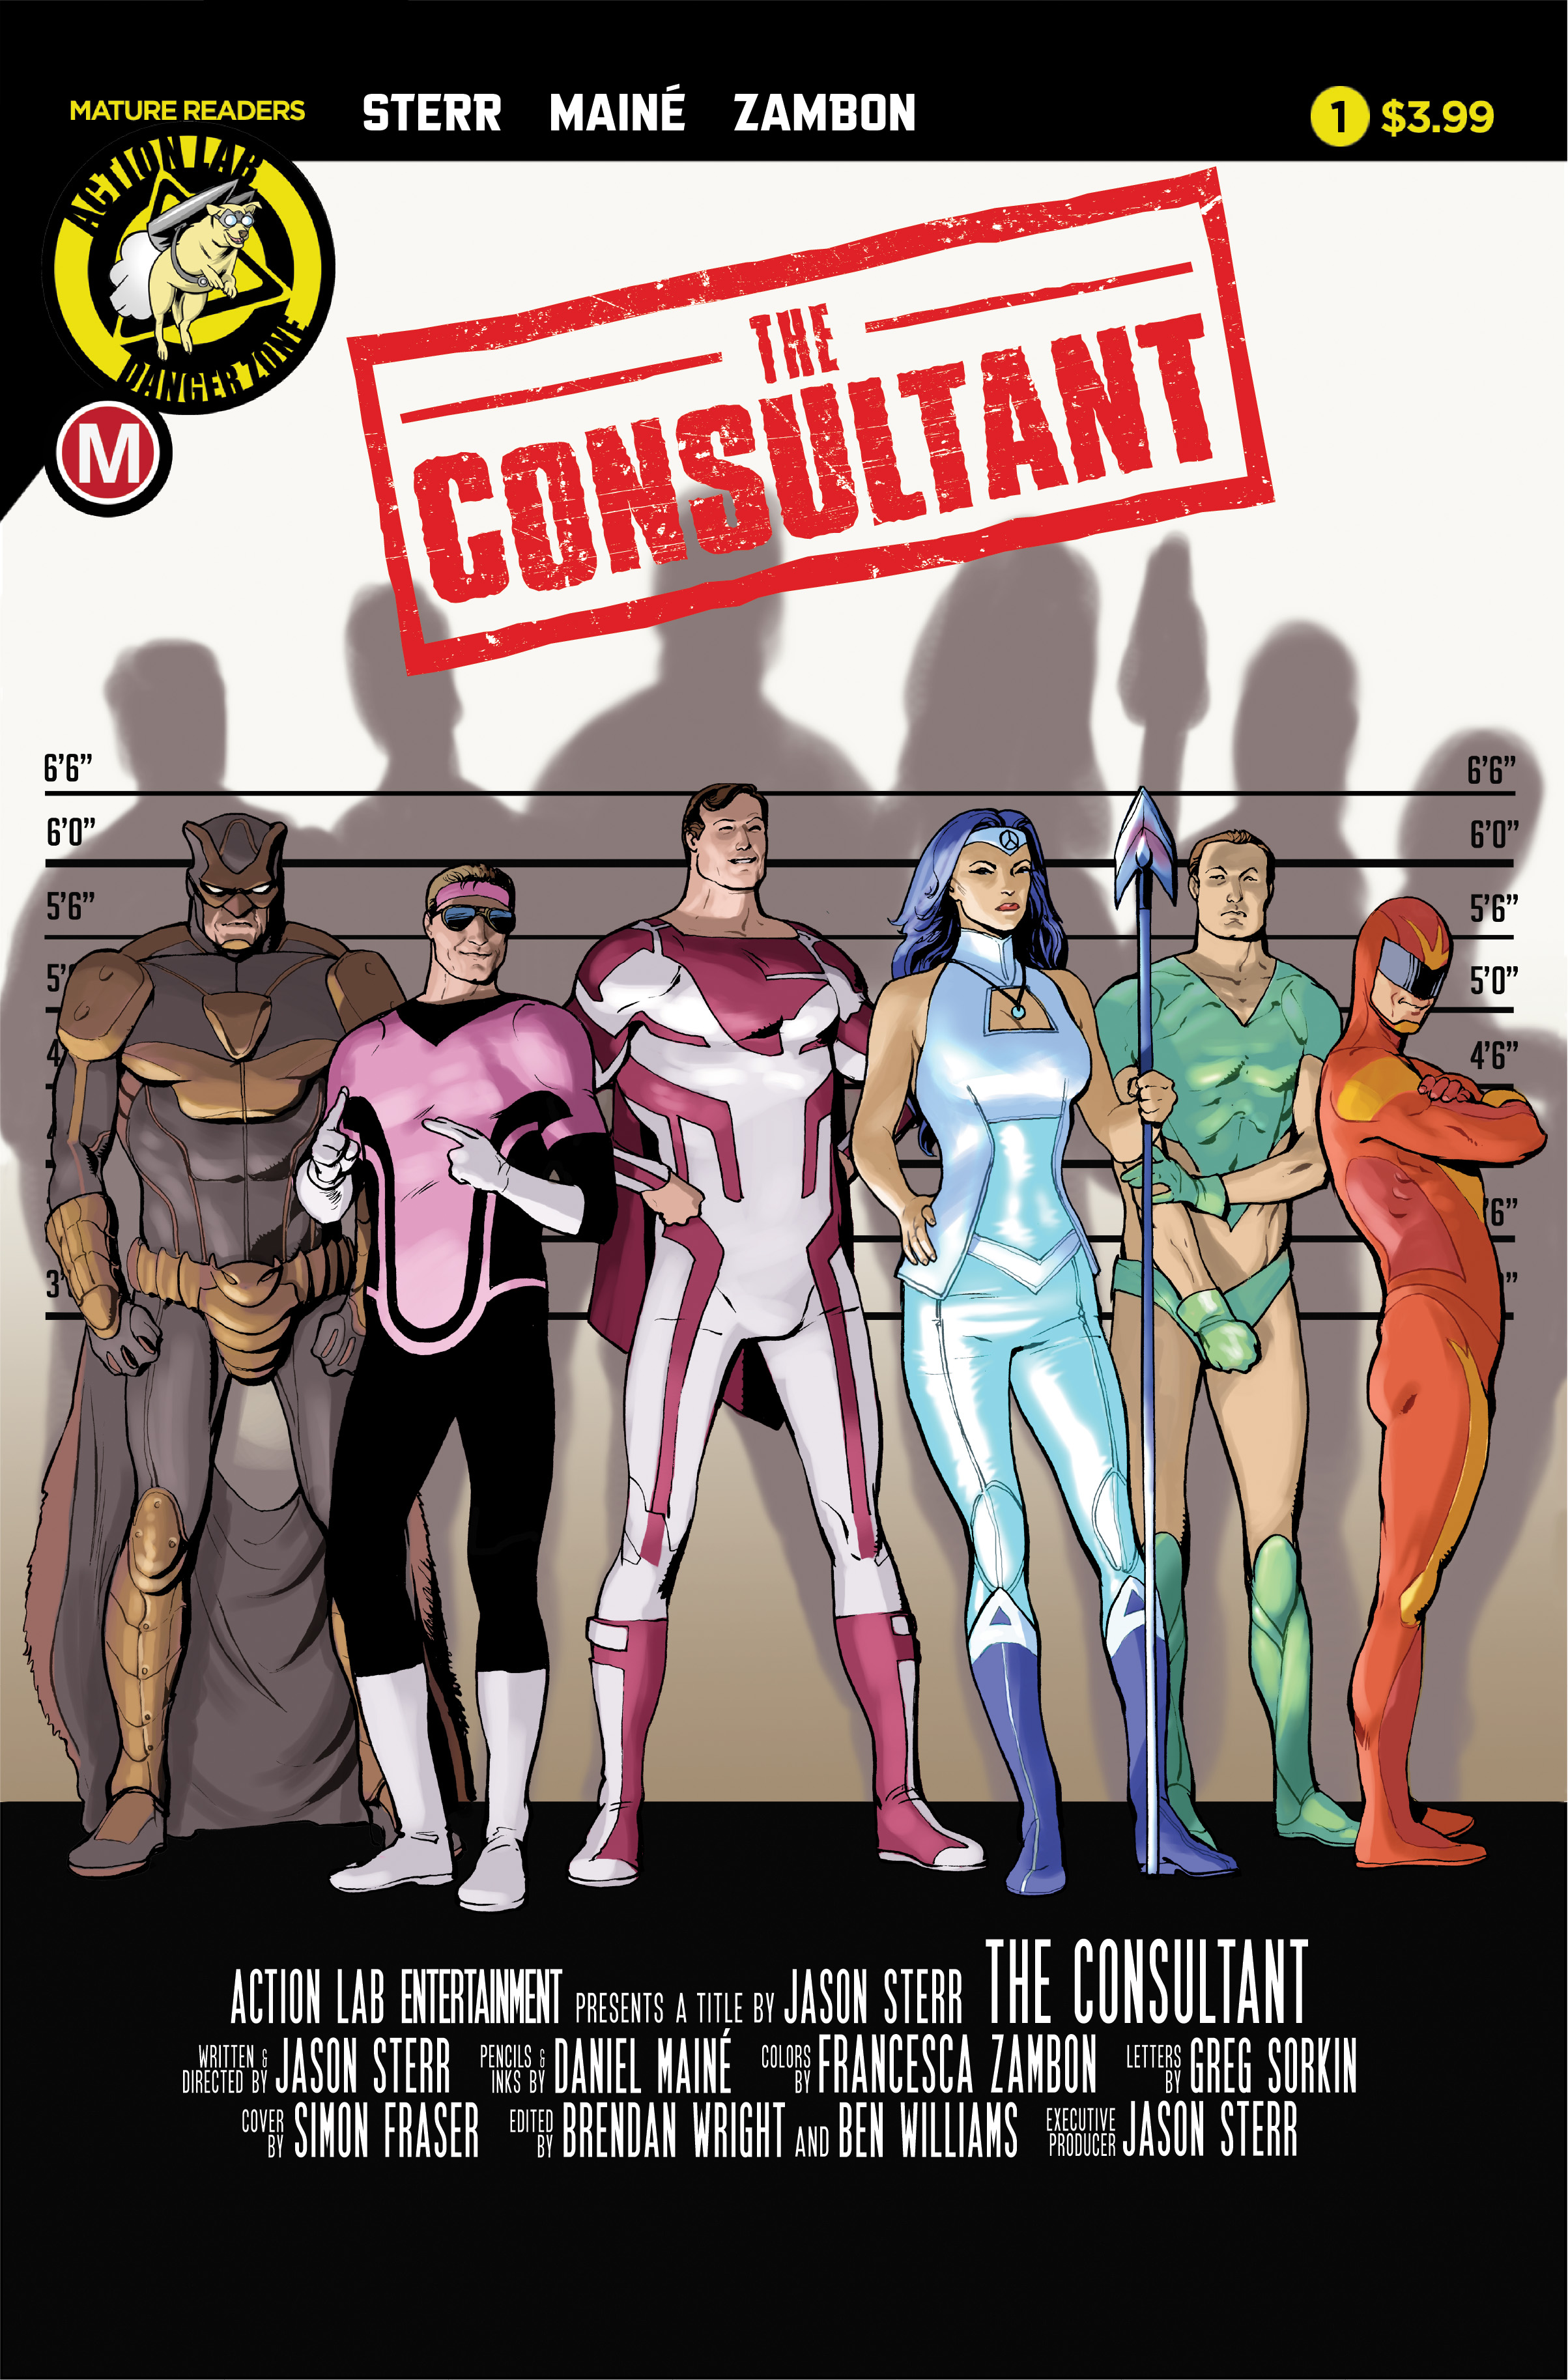 The Consultant #1 Cover.jpg